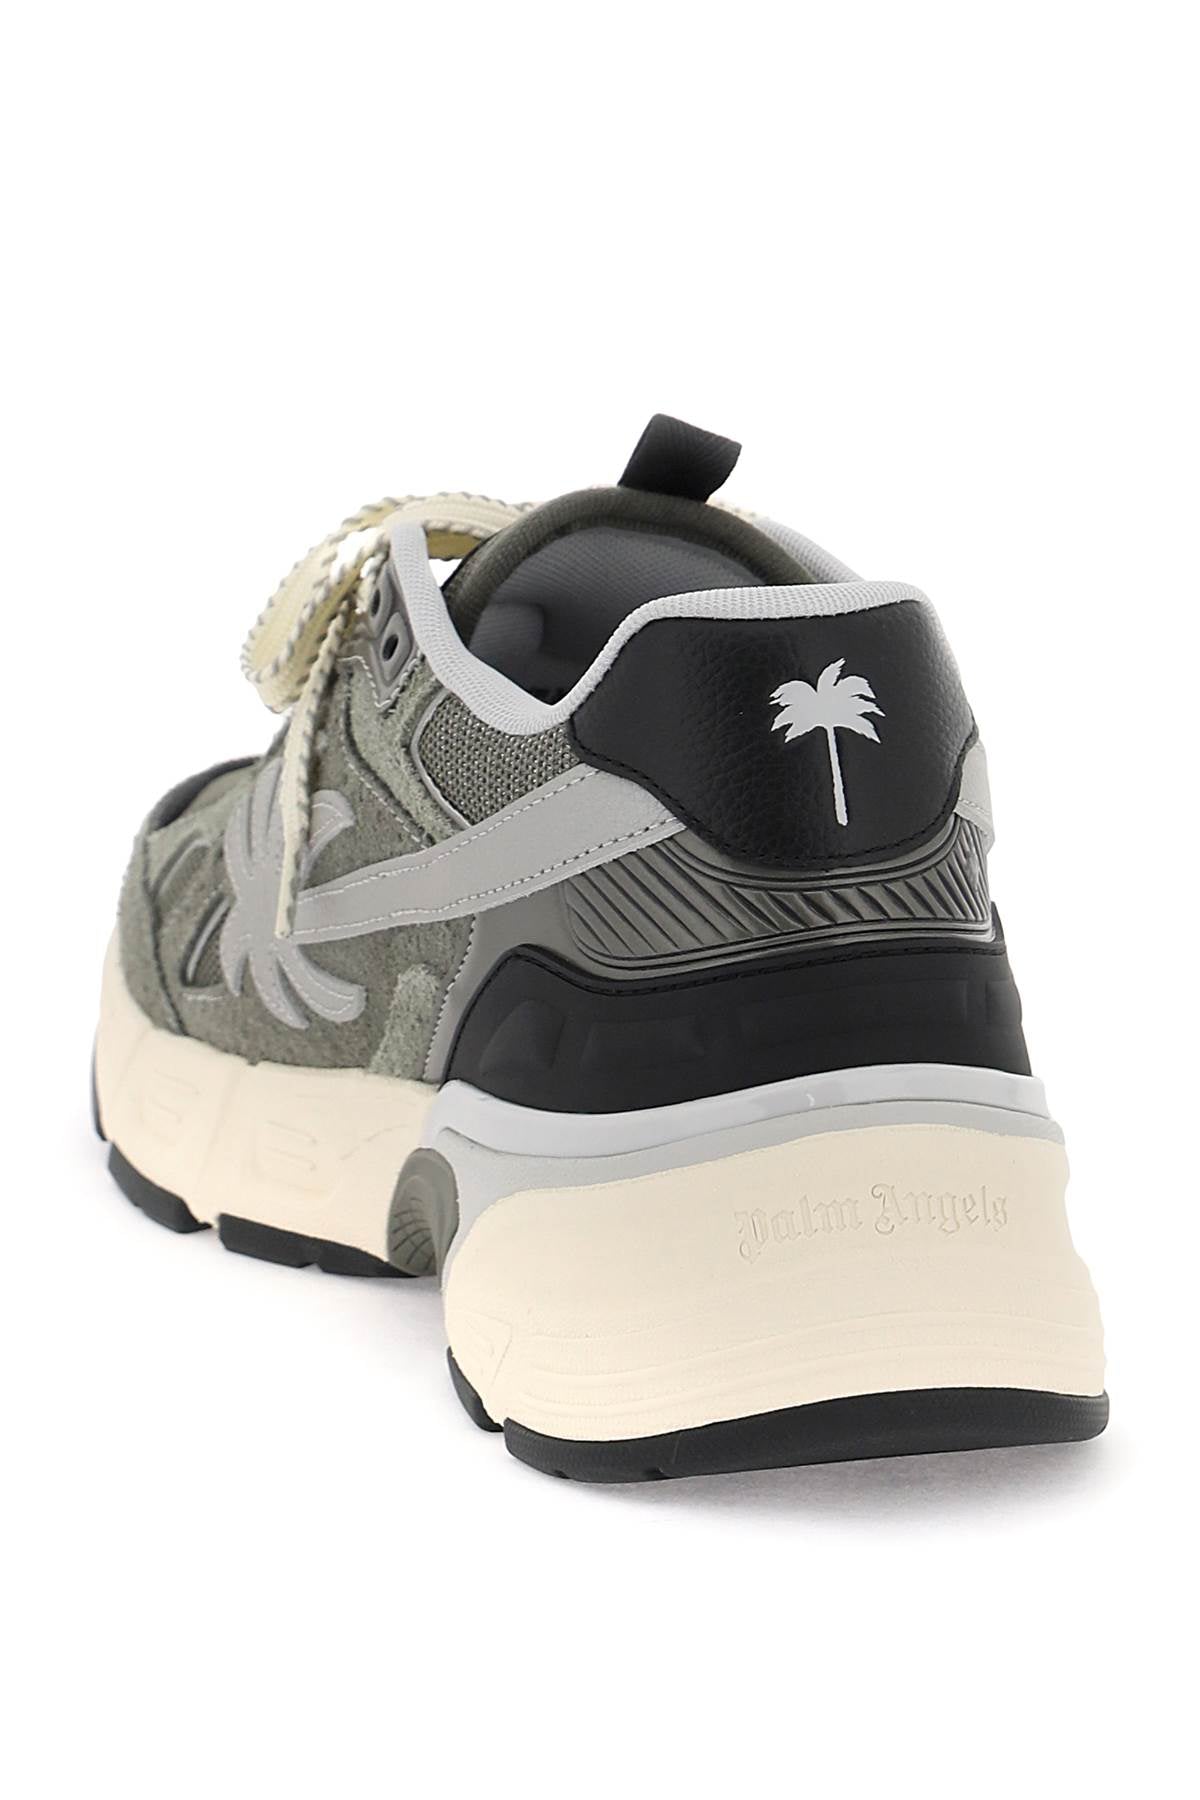 Palm angels palm runner sneakers for-2